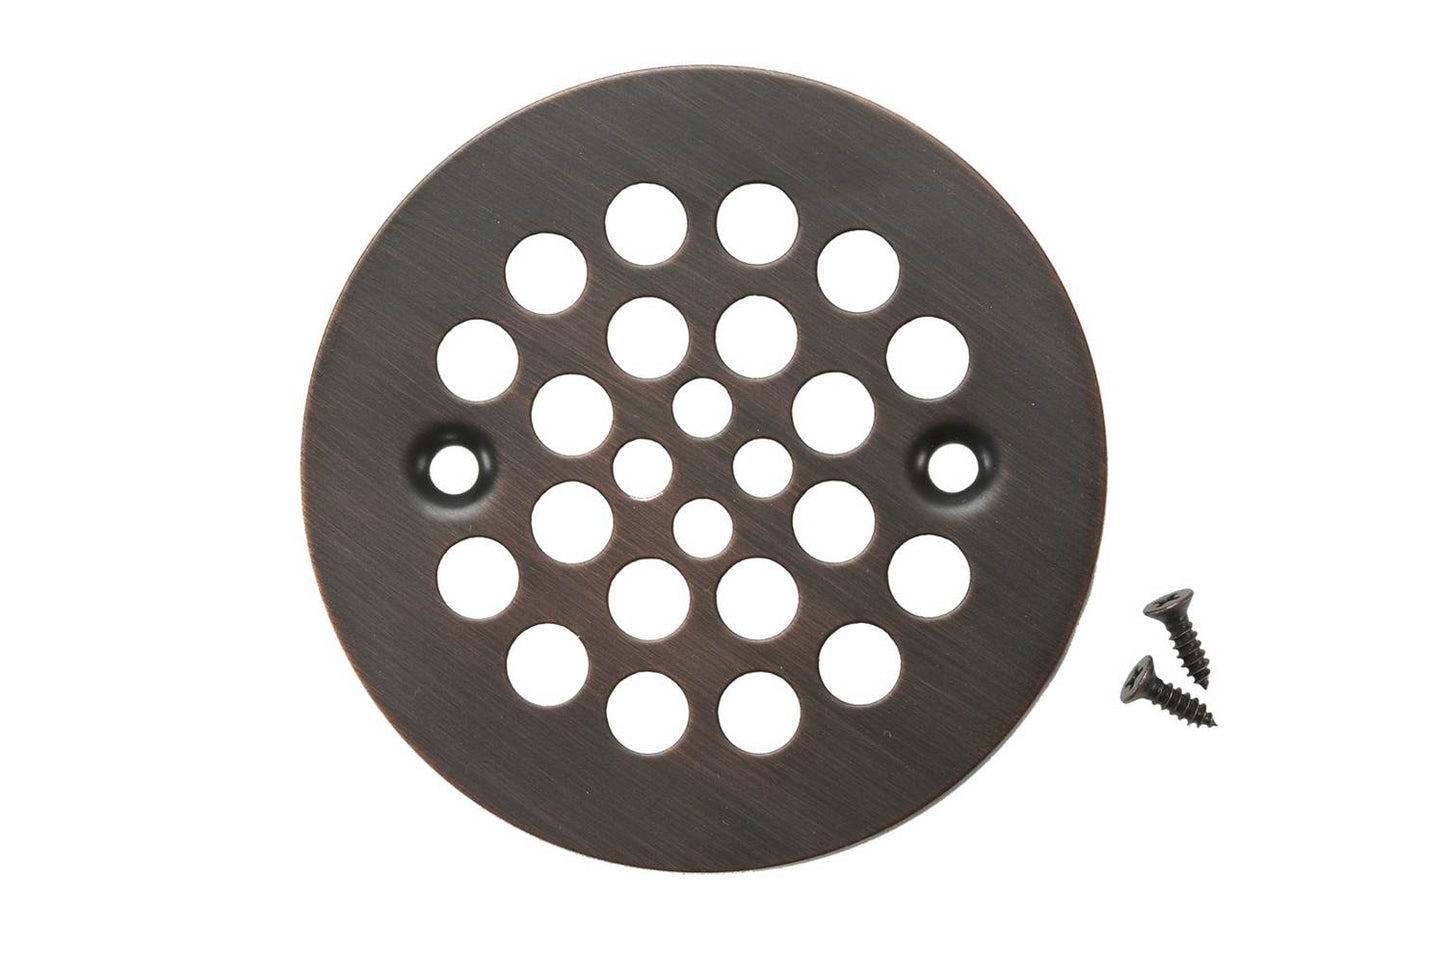 D-415ORB 4.25 Inch Round Shower Drain Cover in Oil Rubbed Bronze